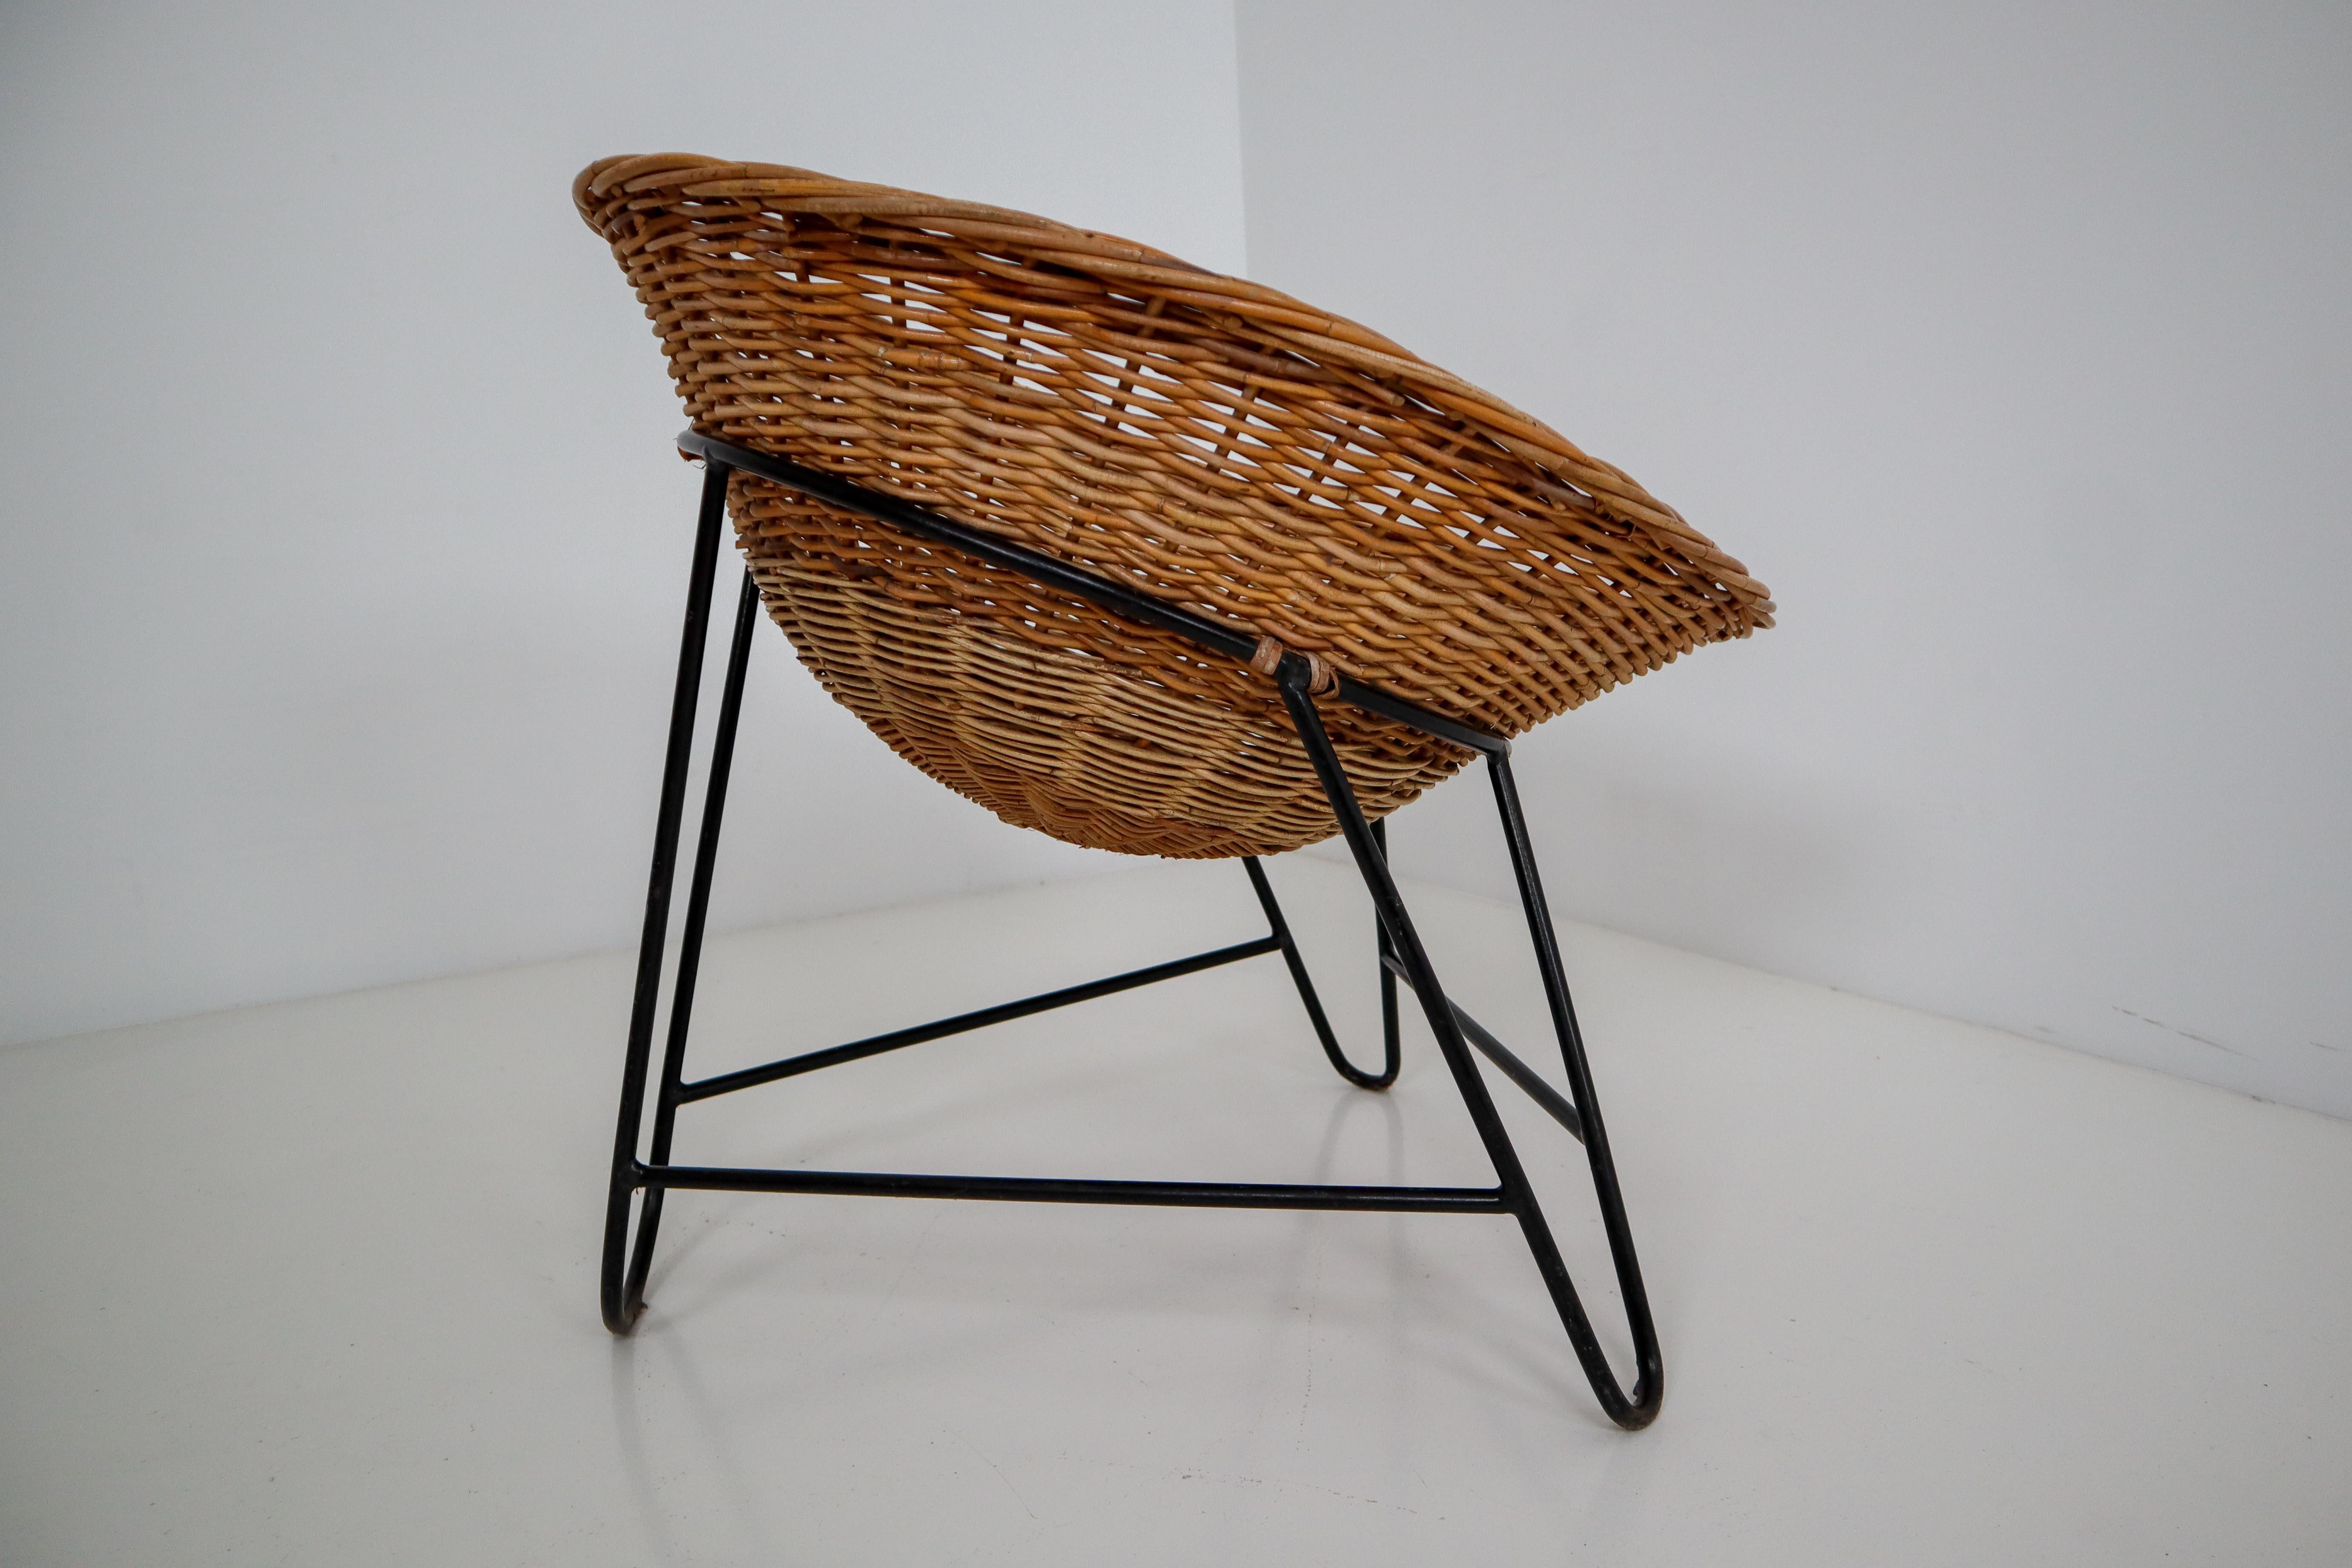 European Midcentury Wicker Easy Lounge Patio Chairs Designed in Europe, 1960s